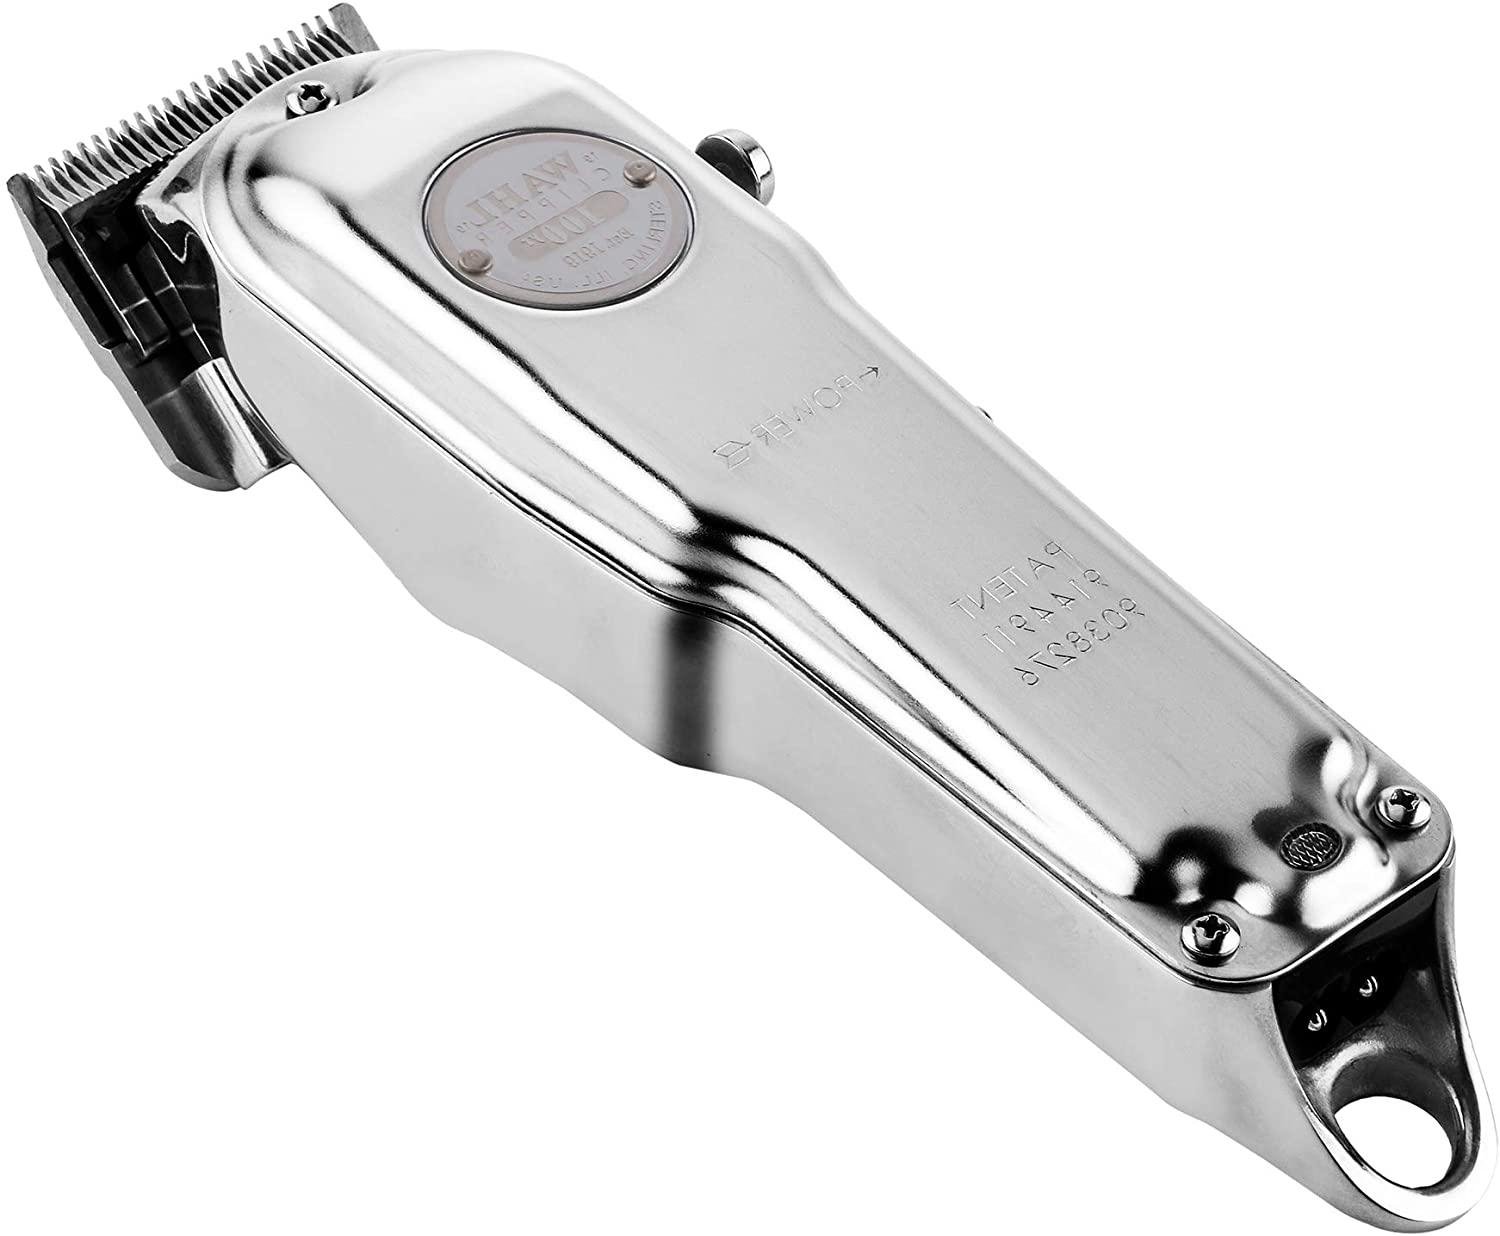 Wahl Professional Limited Edition 100 Year Clipper #81919 5